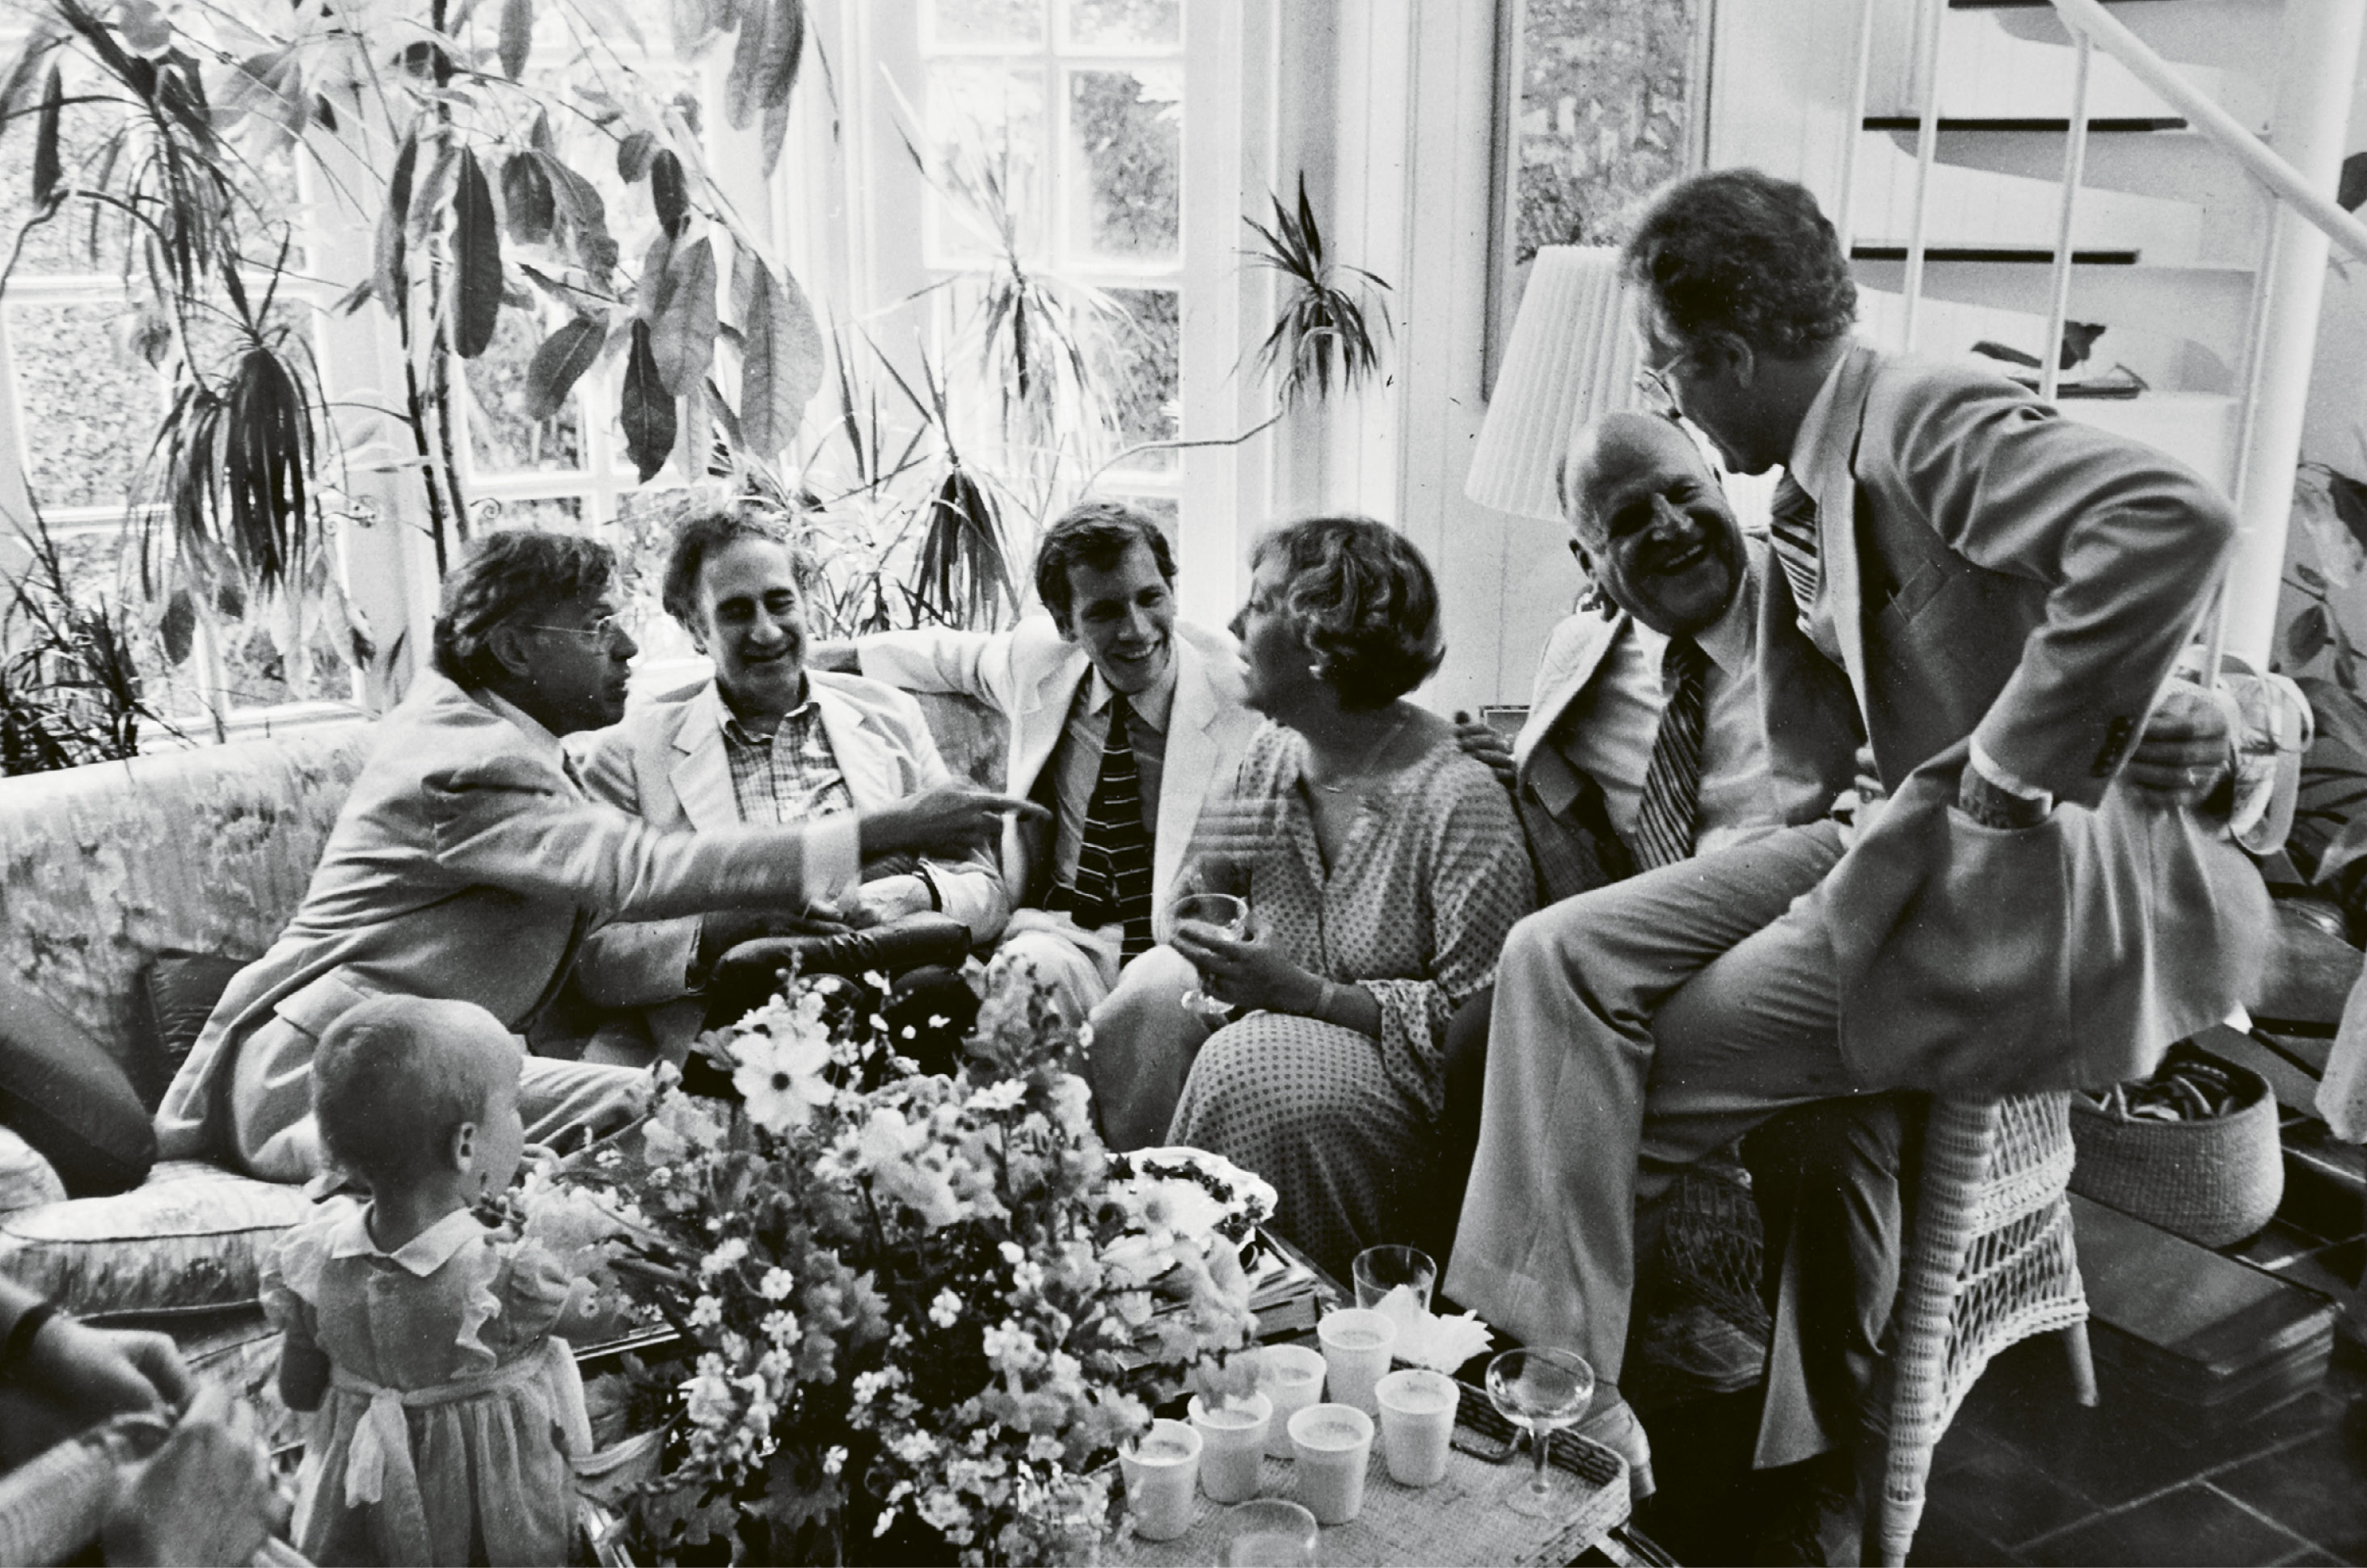 GARDEN PARTY: Ever the hostess, Patti entertains (from left) Charles Wadsworth, Gian Carlo Menotti, Jim Kearney, Ted Stern, and Scott Nickrenz in the McGee family sunroom overlooking the garden, after a Spoleto Festival USA chamber music concert in 1979.